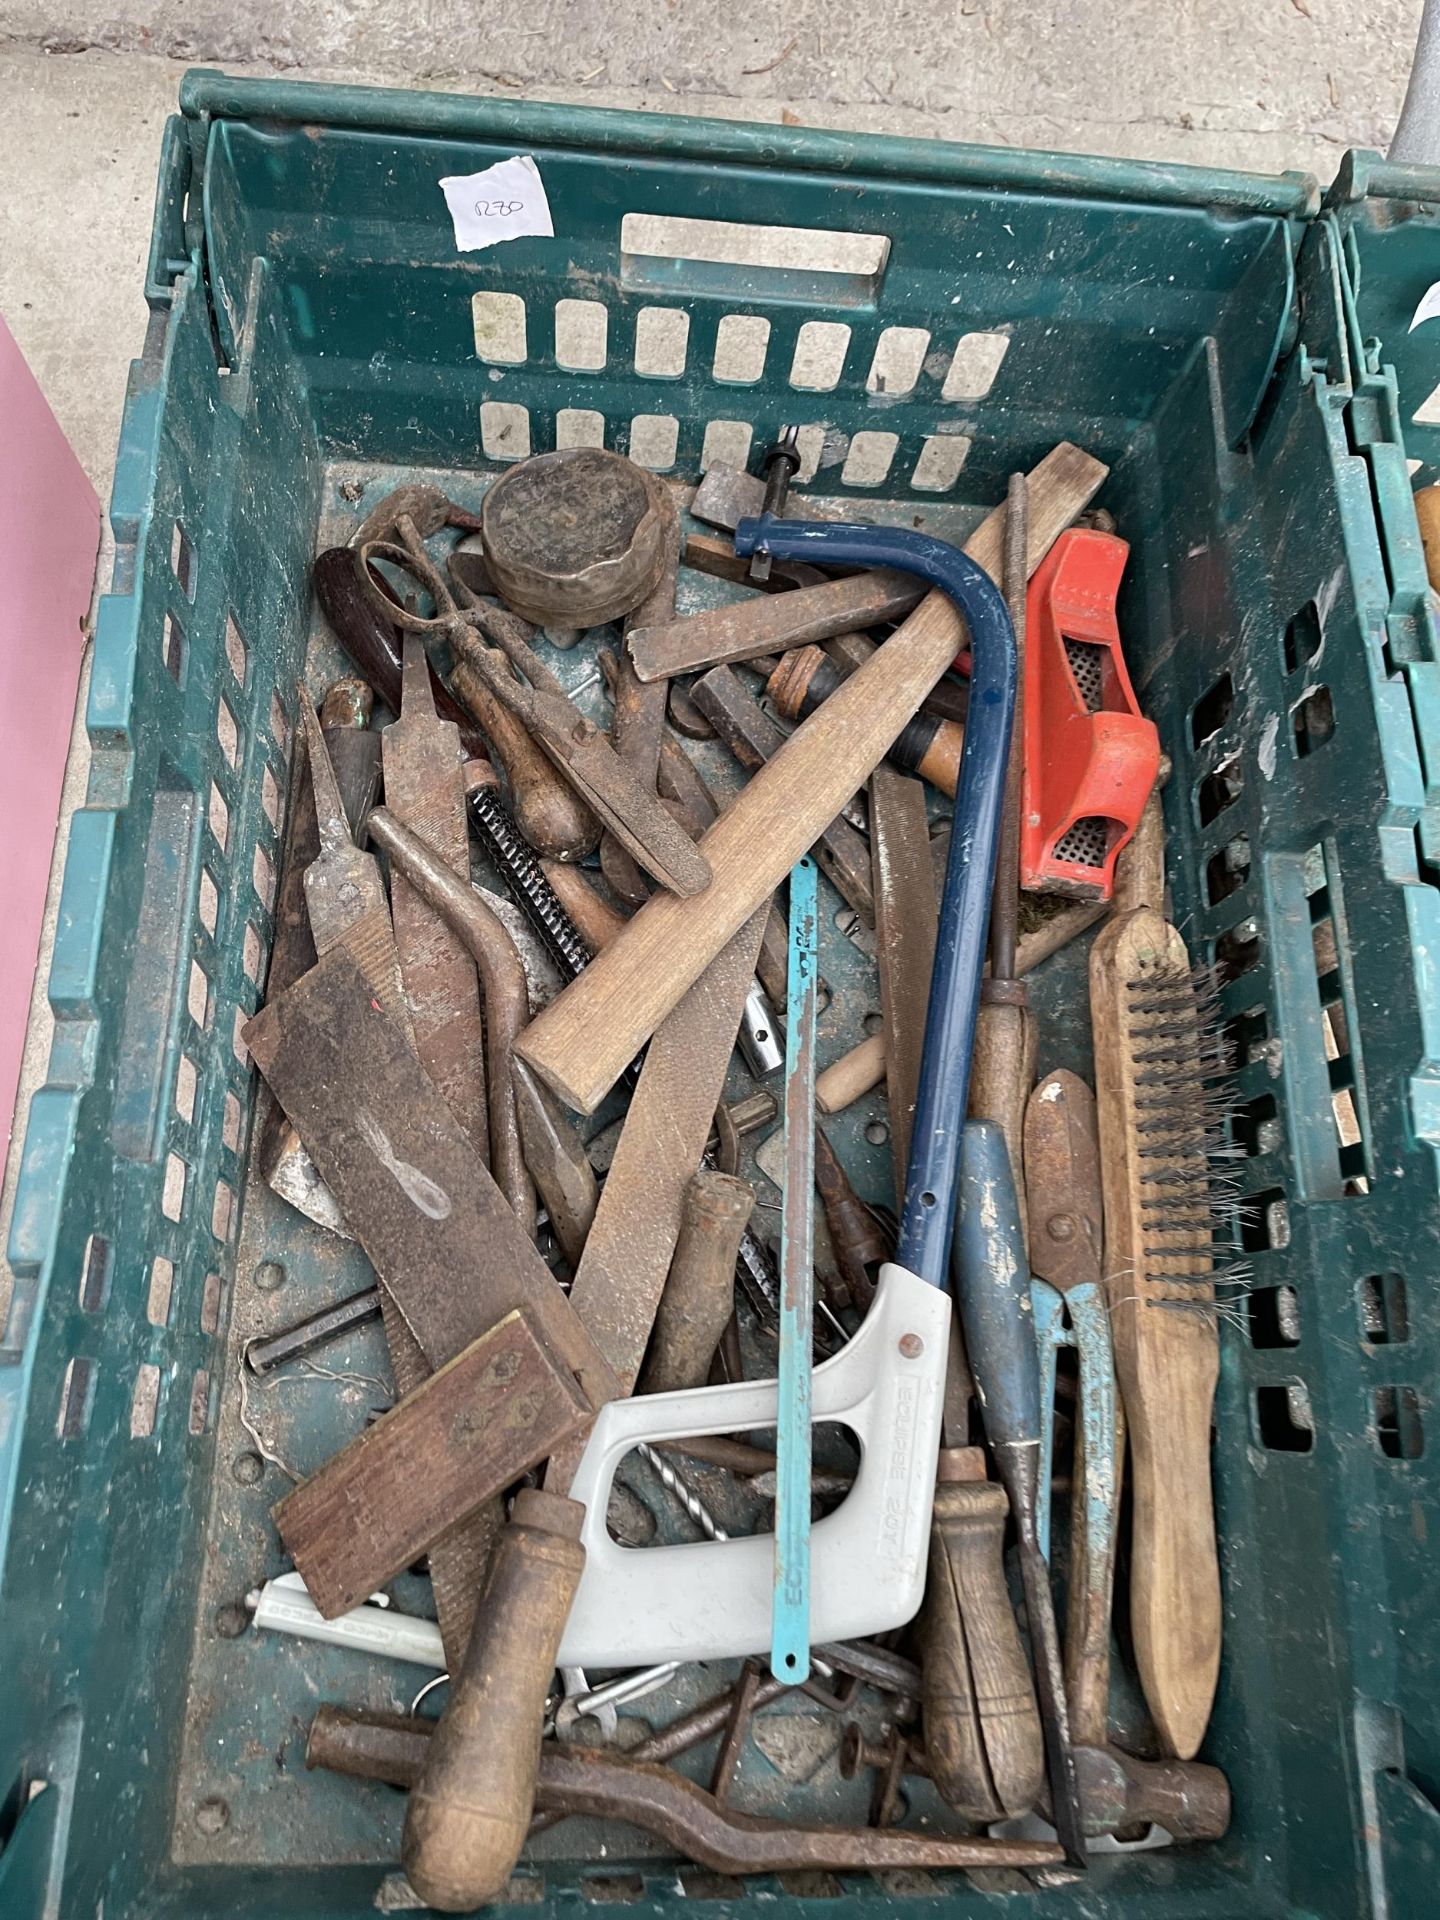 A LARGE ASSORTMENT OF VINTAGE HAND TOOLS TO INCLUDE STILSENS, PLIERS AND BRACE DRILLS ETC - Image 2 of 4